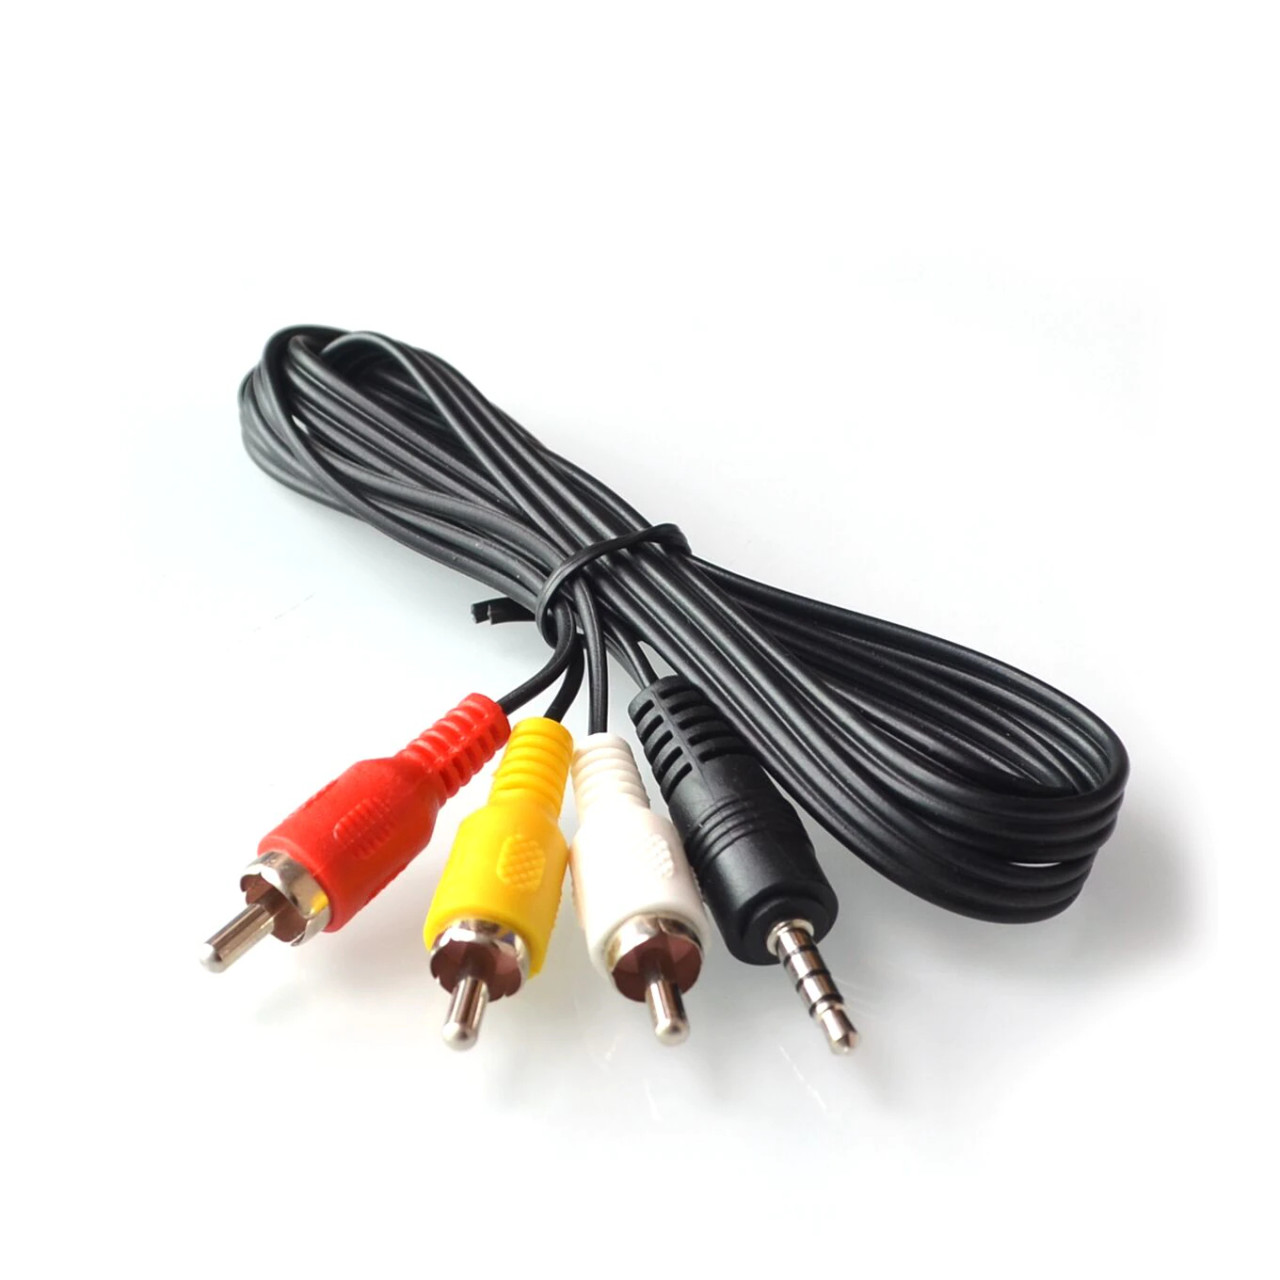 Sømil tyve Modsige 1.5 Meter 3.5mm 4 Conductor to Red, White, Yellow AV Cable